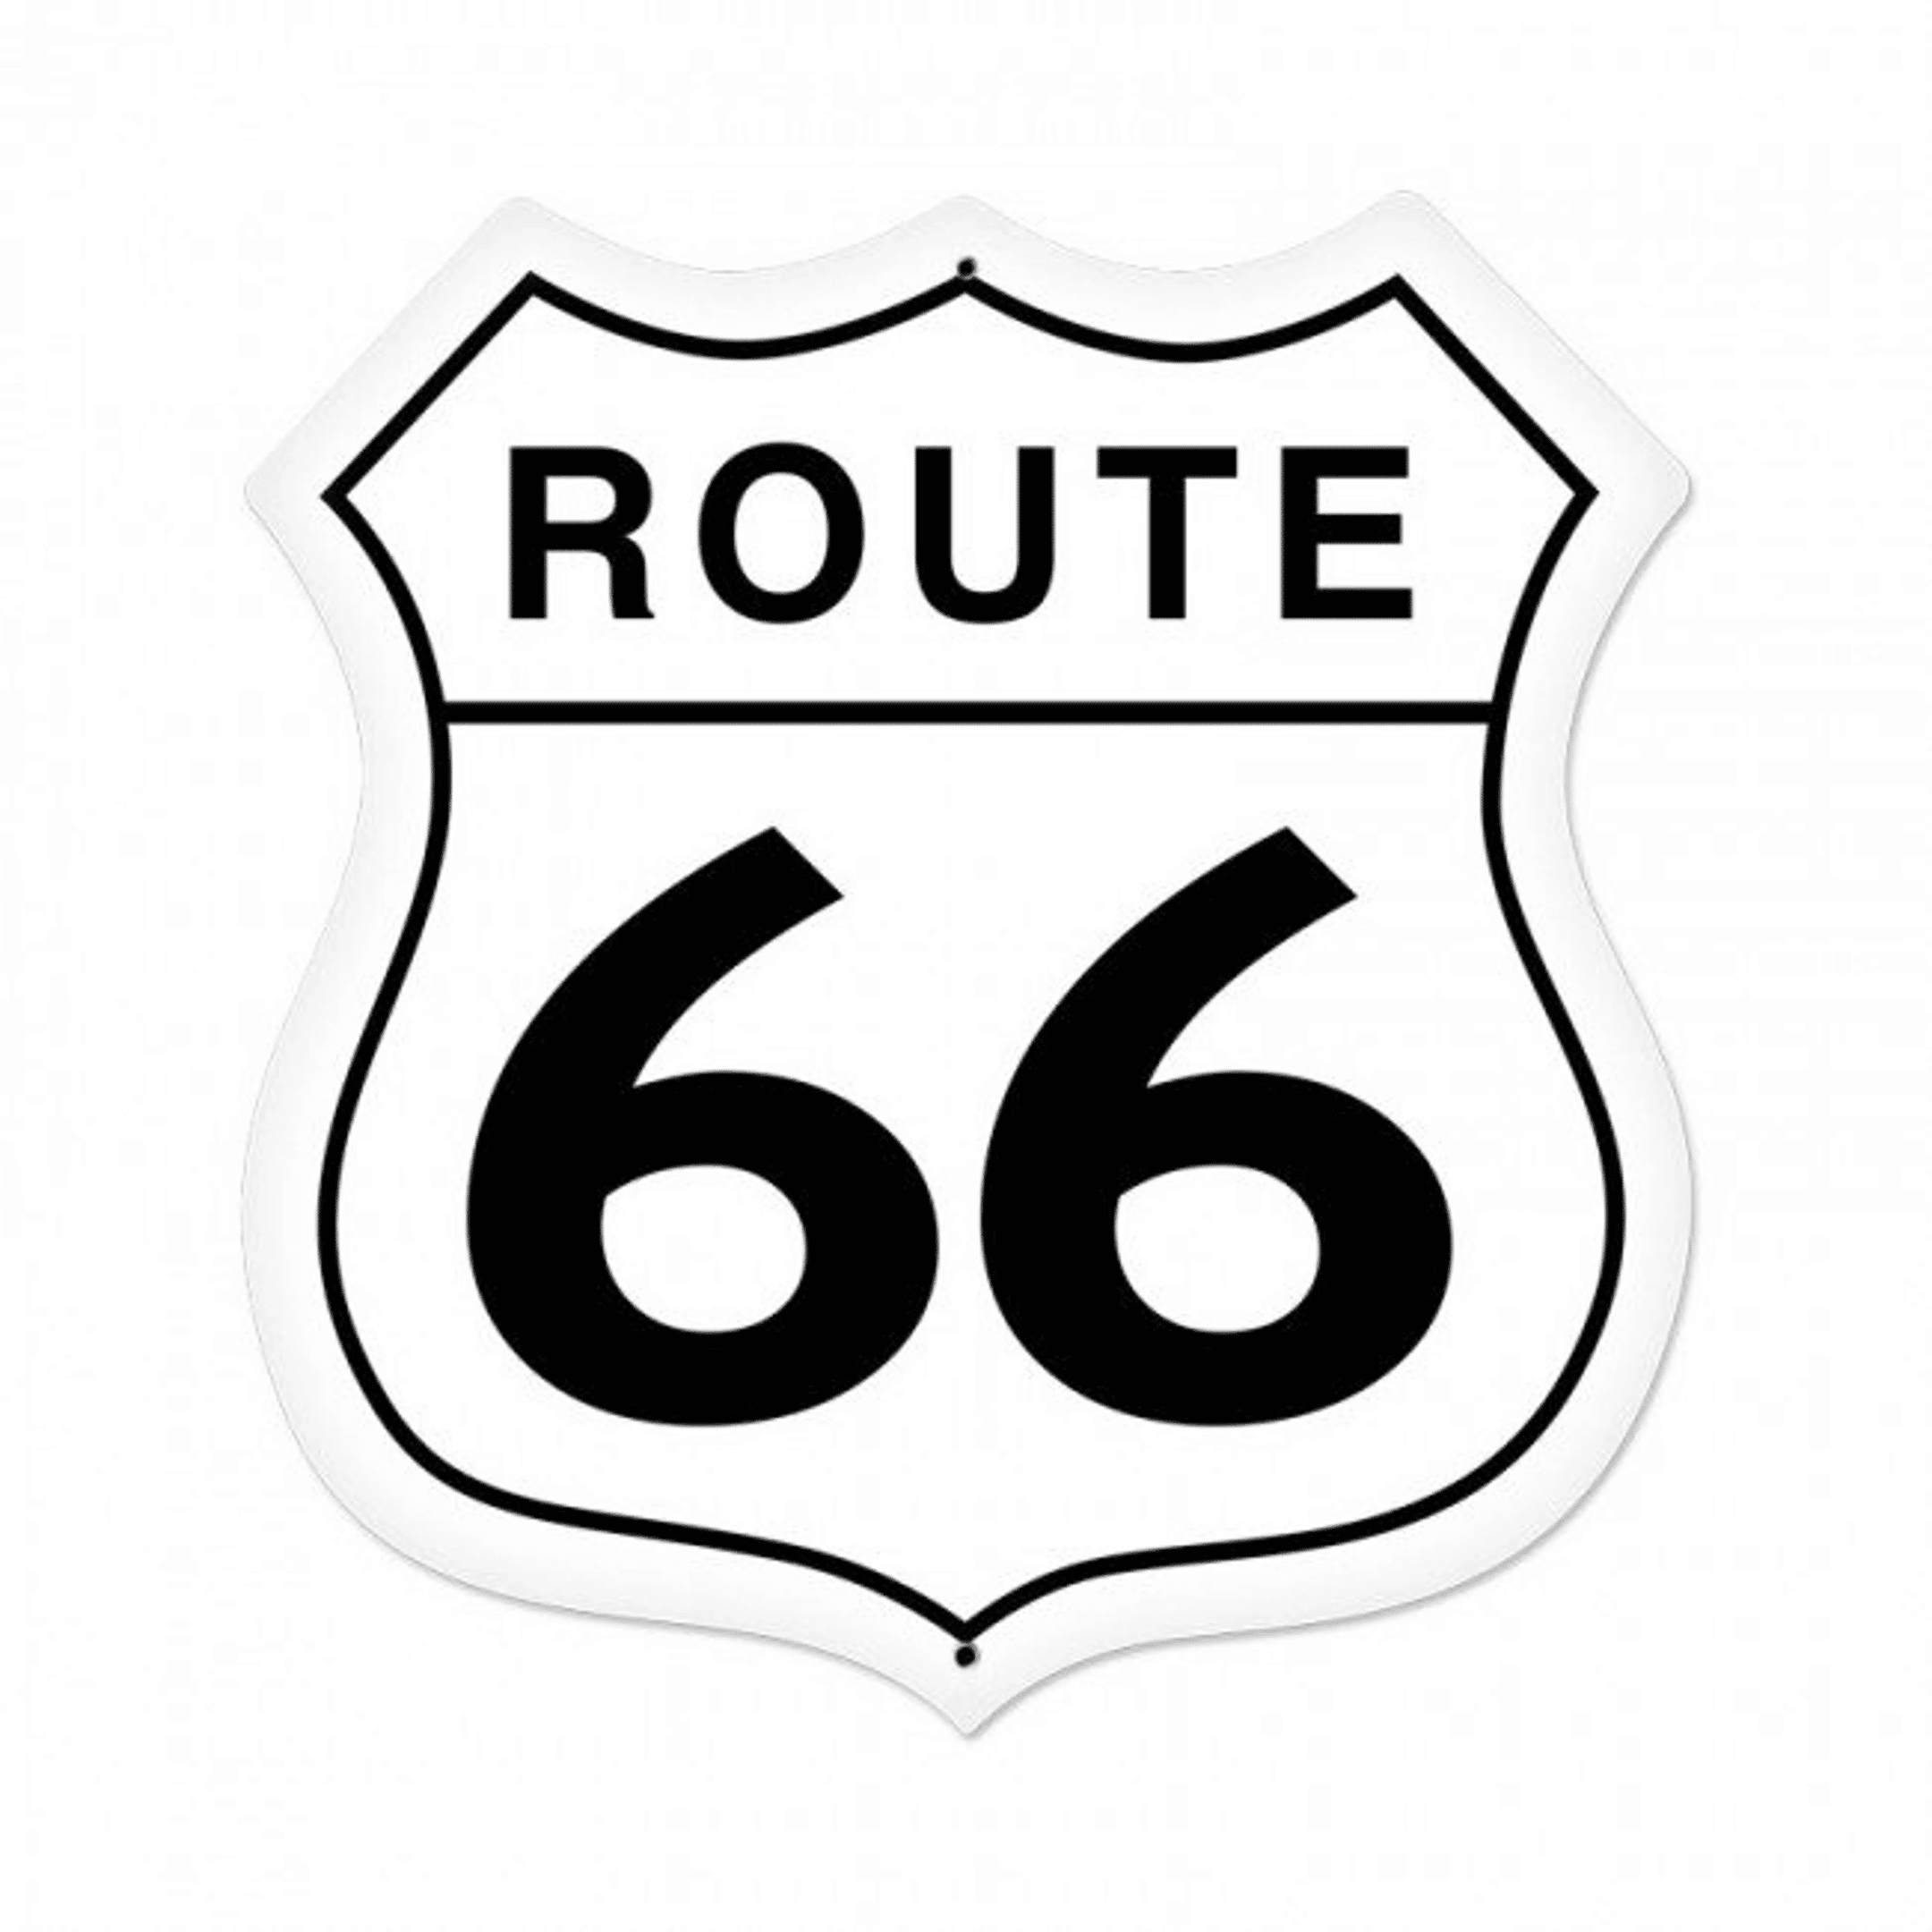 Route 66 Metal Sign 2 Sizes Aged OR New Style Nostalgic Auto Car Gas Oil Garage Art Home Wall Decor PS